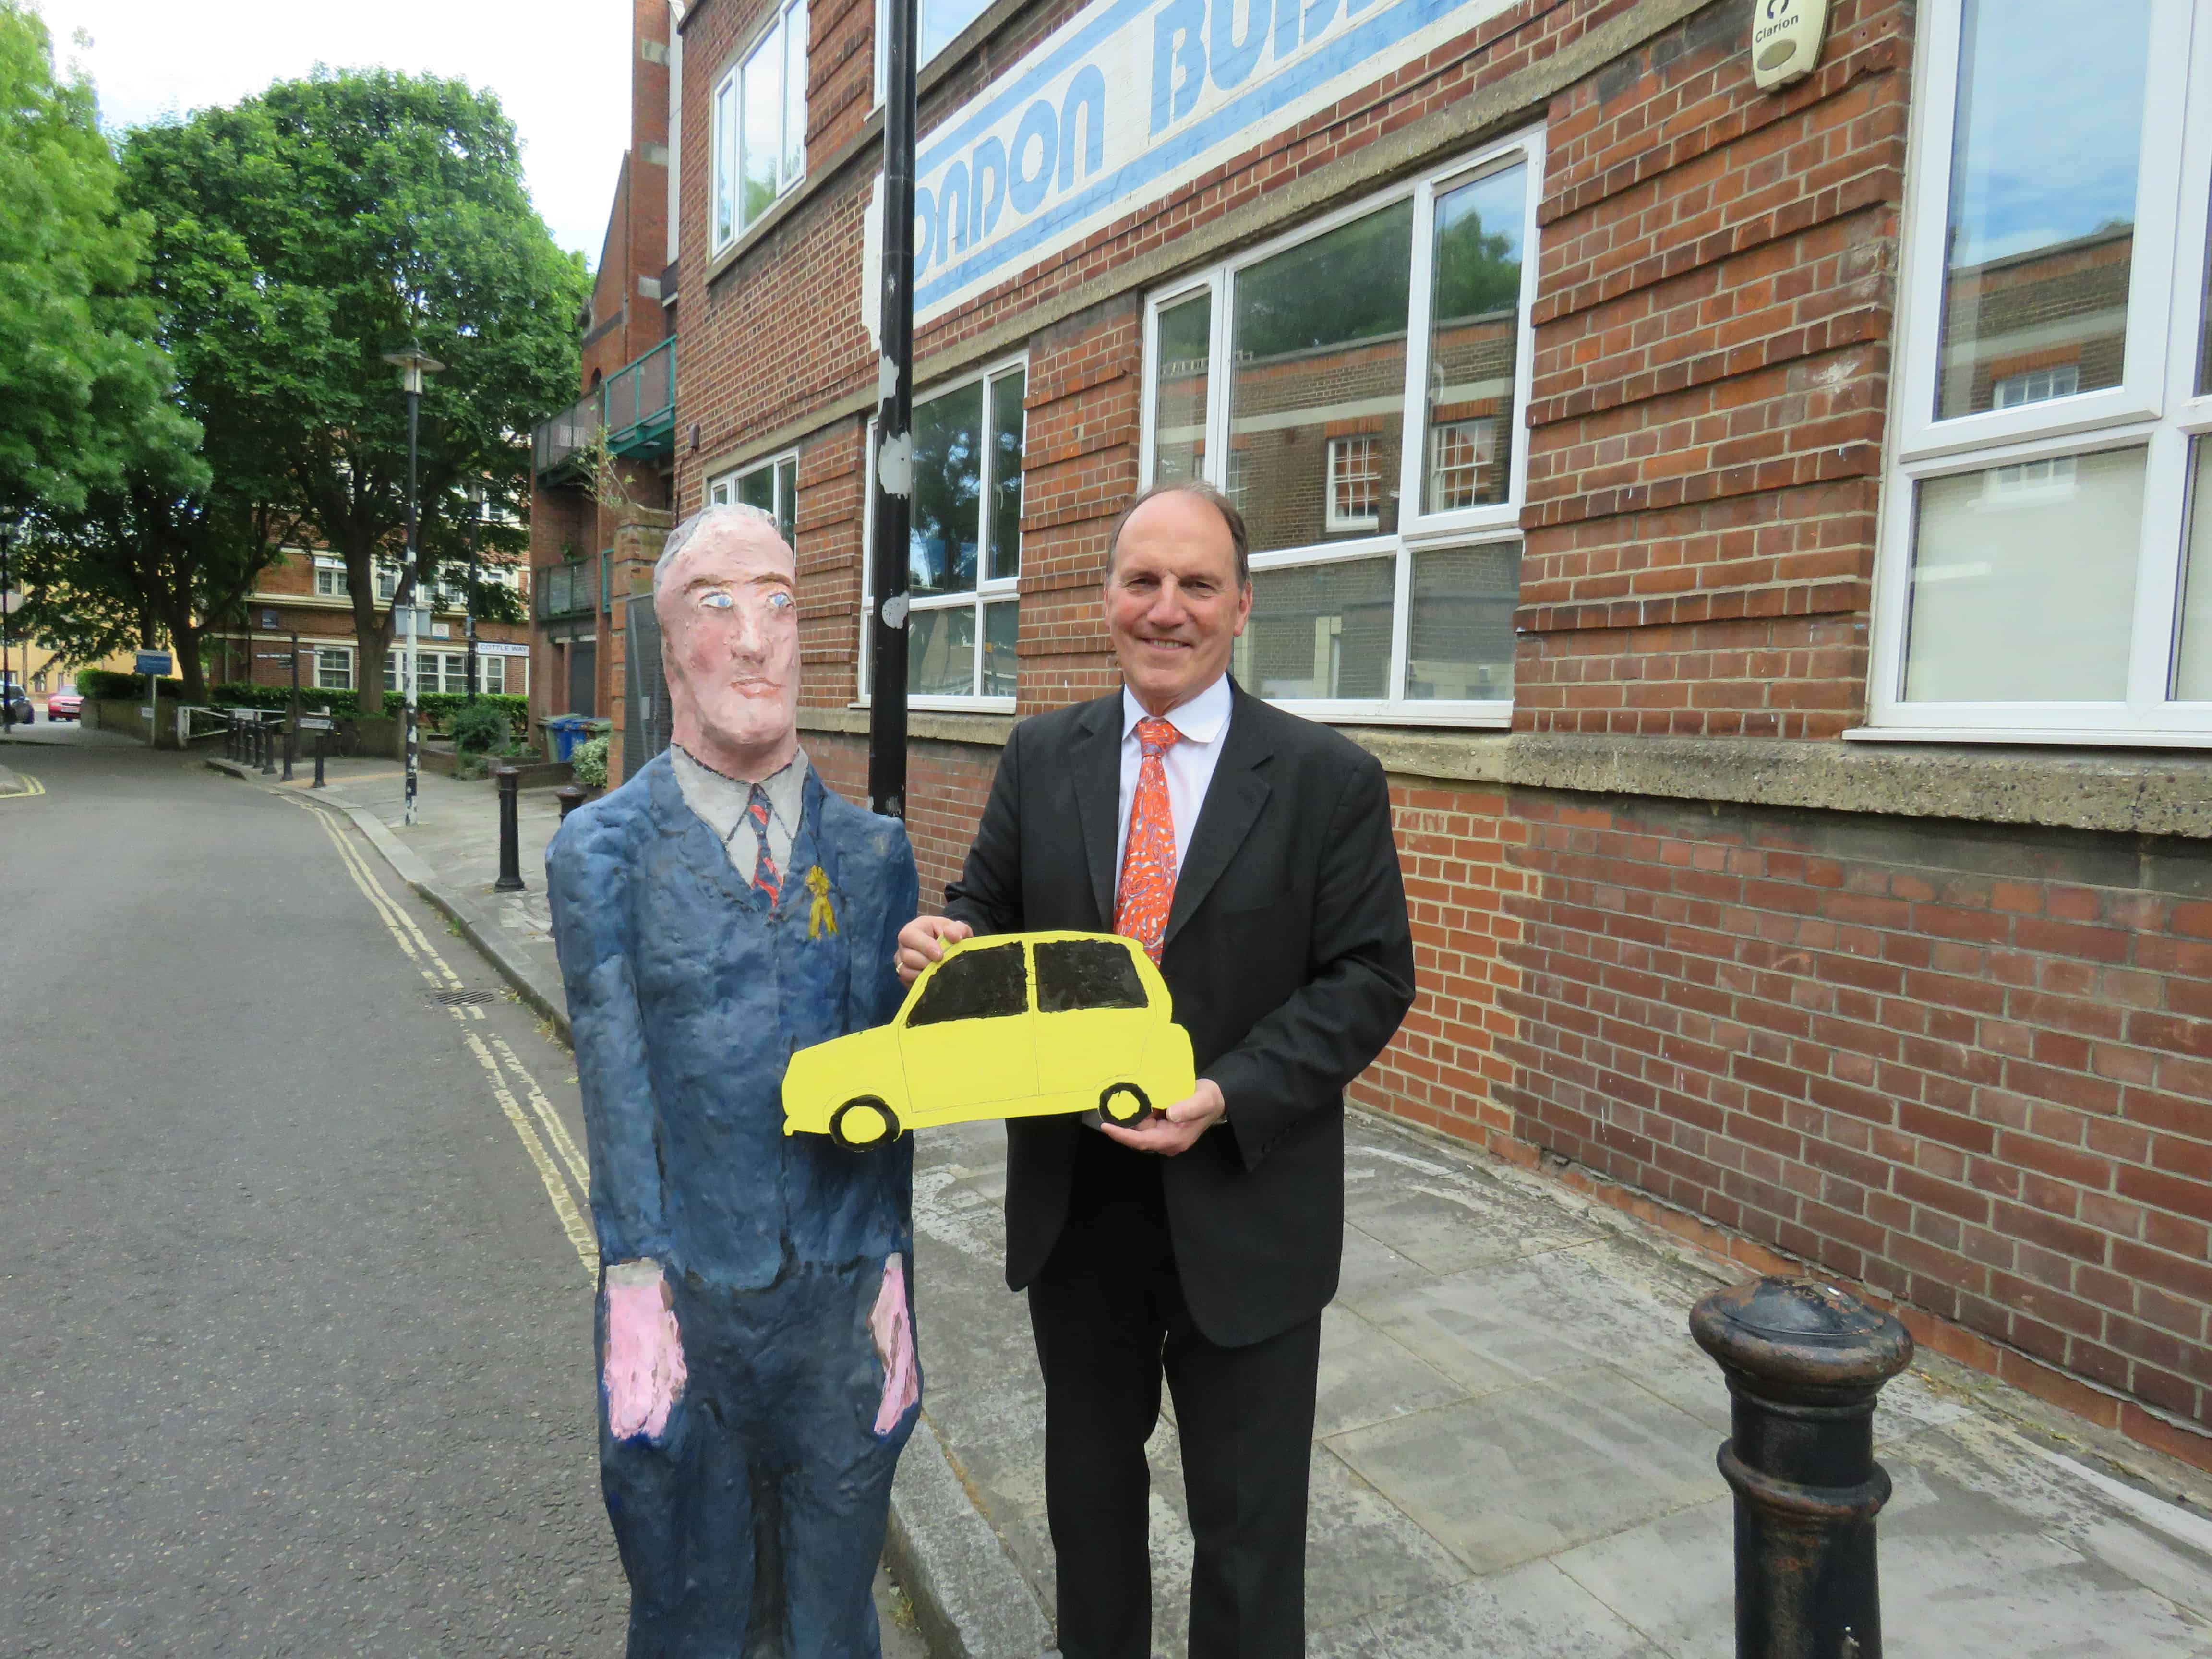 Sir Simon Hughes, pictured with his statue outside of the London Bubble Theatre Company